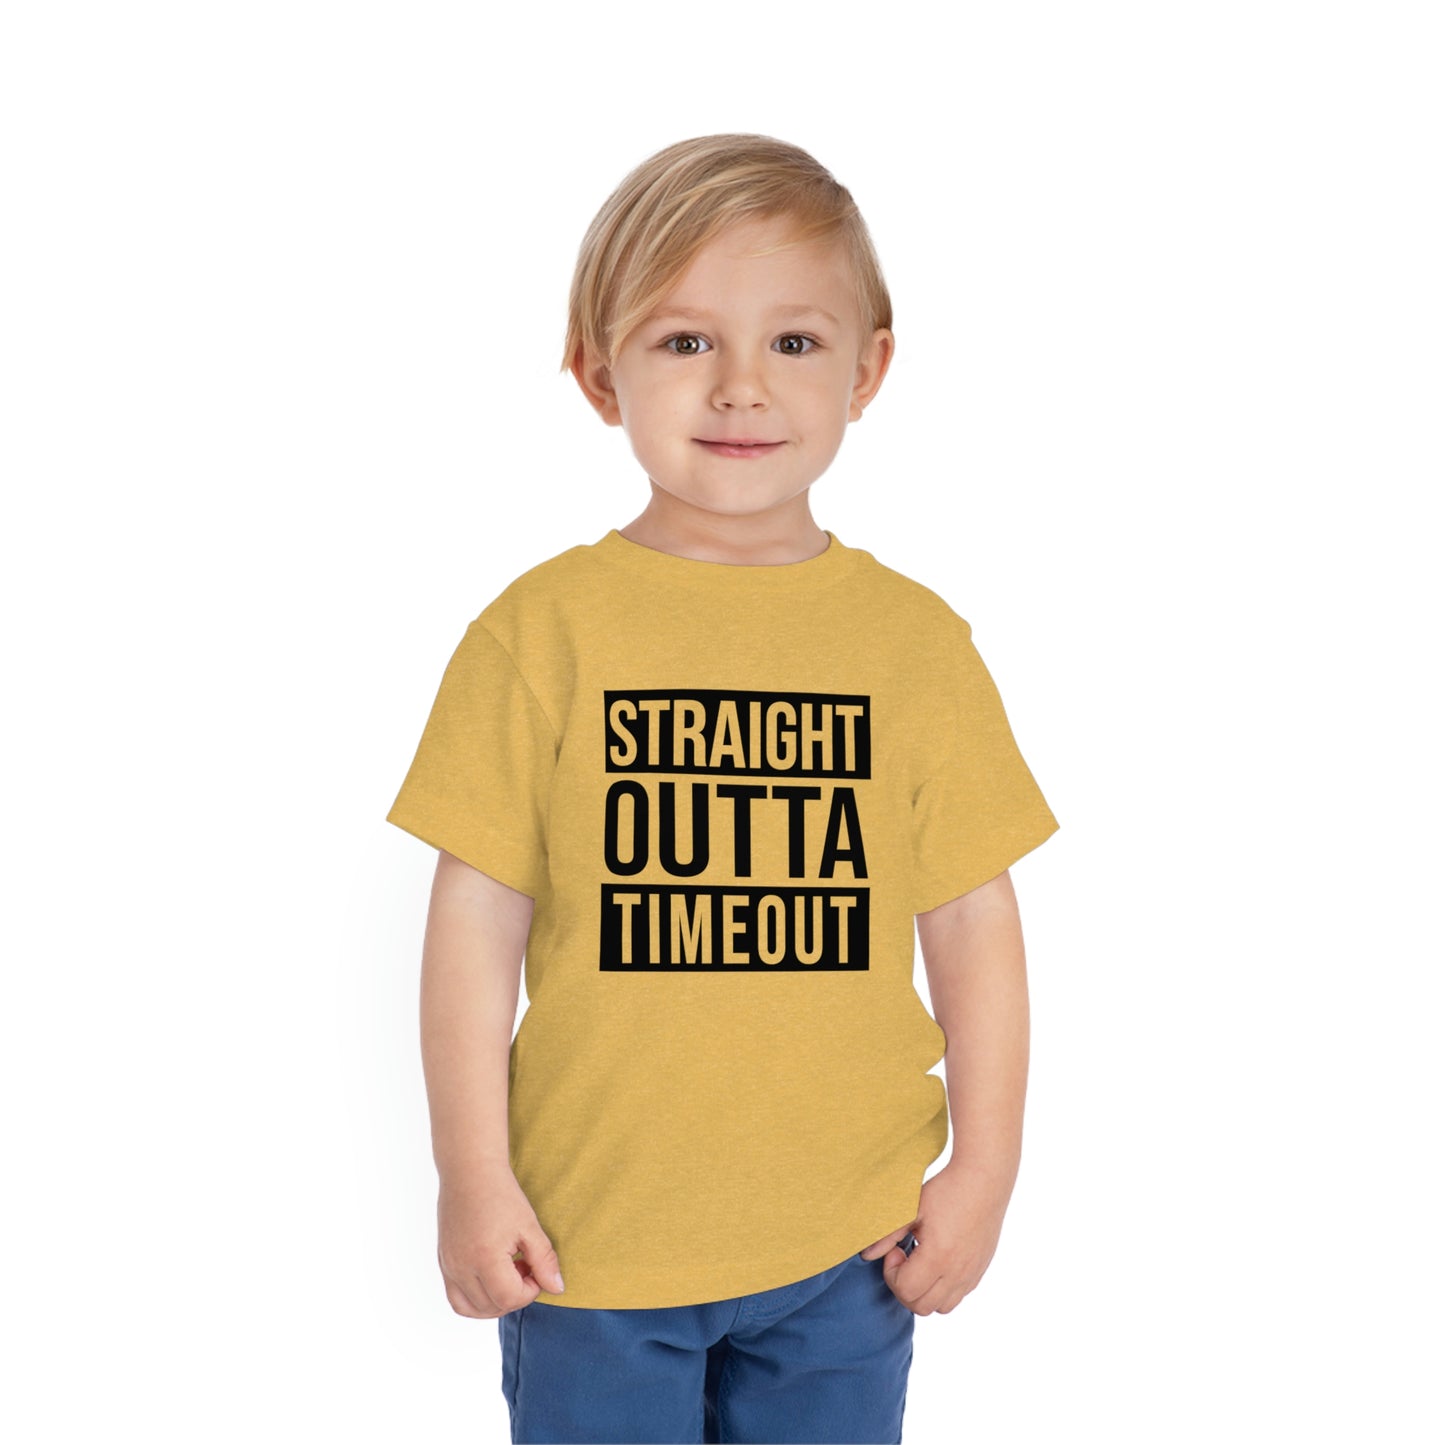 "Straight Outta Timeout" Toddler Short Sleeve Tee (2T-5T)